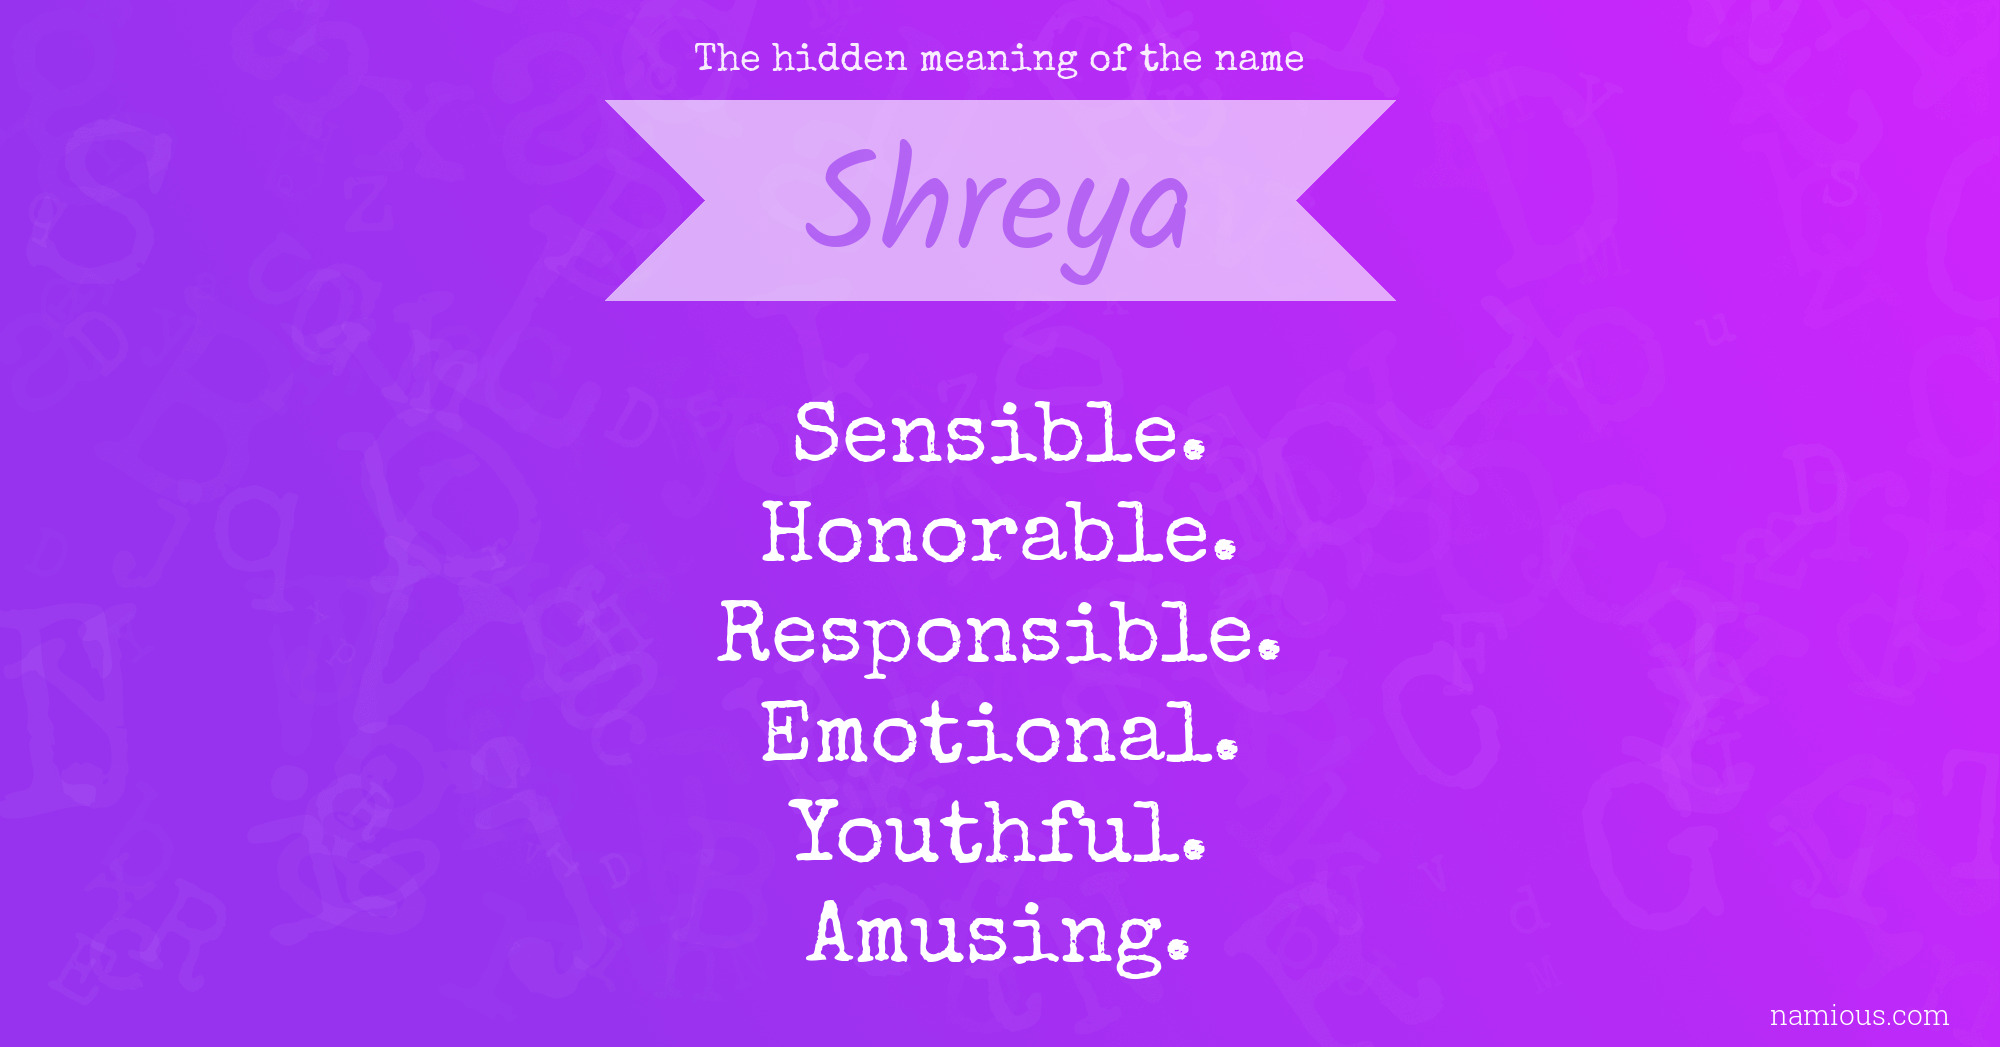 The hidden meaning of the name Shreya